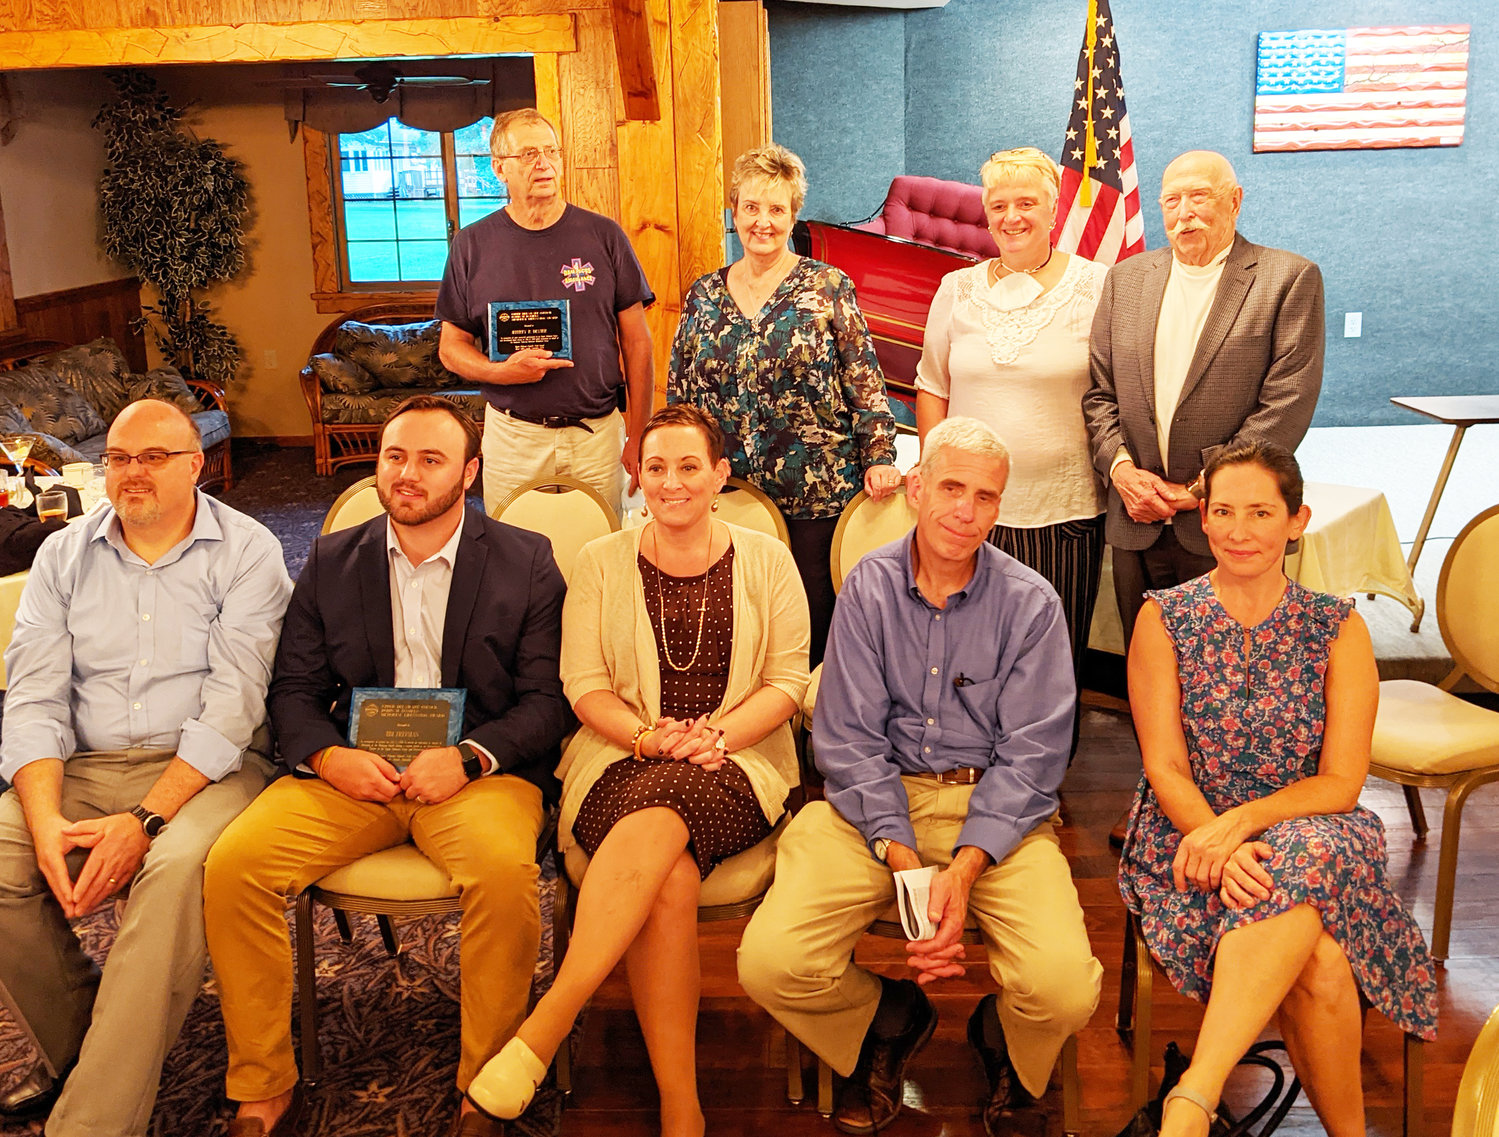 The 2020 Upper Delaware Council Honorees include (Front row from left) Paul Freeman, Andrew Freeman, Karen Freeman (family of the late Tim Freeman), Robin M. Daniels Memorial Lifesaving Award; John Ogozalek, Special Recognition Award; Tina Spangler, director of the Big Eddy Film Festival, Cultural Achievement Award. In the Back row, from left, Jeff Dexter (Damascus Township Volunteer Ambulance Corps), Robin M. Daniels Memorial Lifesaving Award; Carla Hauser Hahn, Special Recognition Awards; Kim Erickson and Fred Murray (representing Wayne County Historical Society’s 1888 Spencer Tractor Restoration), Cultural Achievement Award. Missing from photo are Pennsylvania Representative Jonathan Fritz (111th District), Rep. Michael Peifer (139th District), and Senator Lisa Baker (20th District), UDC’s Advocacy Award; Harold G. Roeder, Jr., Distinguished Service Award; Star Hesse, Volunteer Award; Paddy McCarthy, James Moss, Johnny Smith, Andy Moss, Robin M. Daniels Memorial Lifesaving Award; Dr. Heather Galbraith, Carrie Blakeslee, Jeff Cole, and Barbara White, USGS Northern Appalachian Research Laboratory, Partnership Award; Nancy Furdock, Community Service Award; Dan Plummer, Friends of the Upper Delaware River, Inc., and Bill Streeter, director of the Delaware Valley Raptor Center, Recreation Achievement Awards.